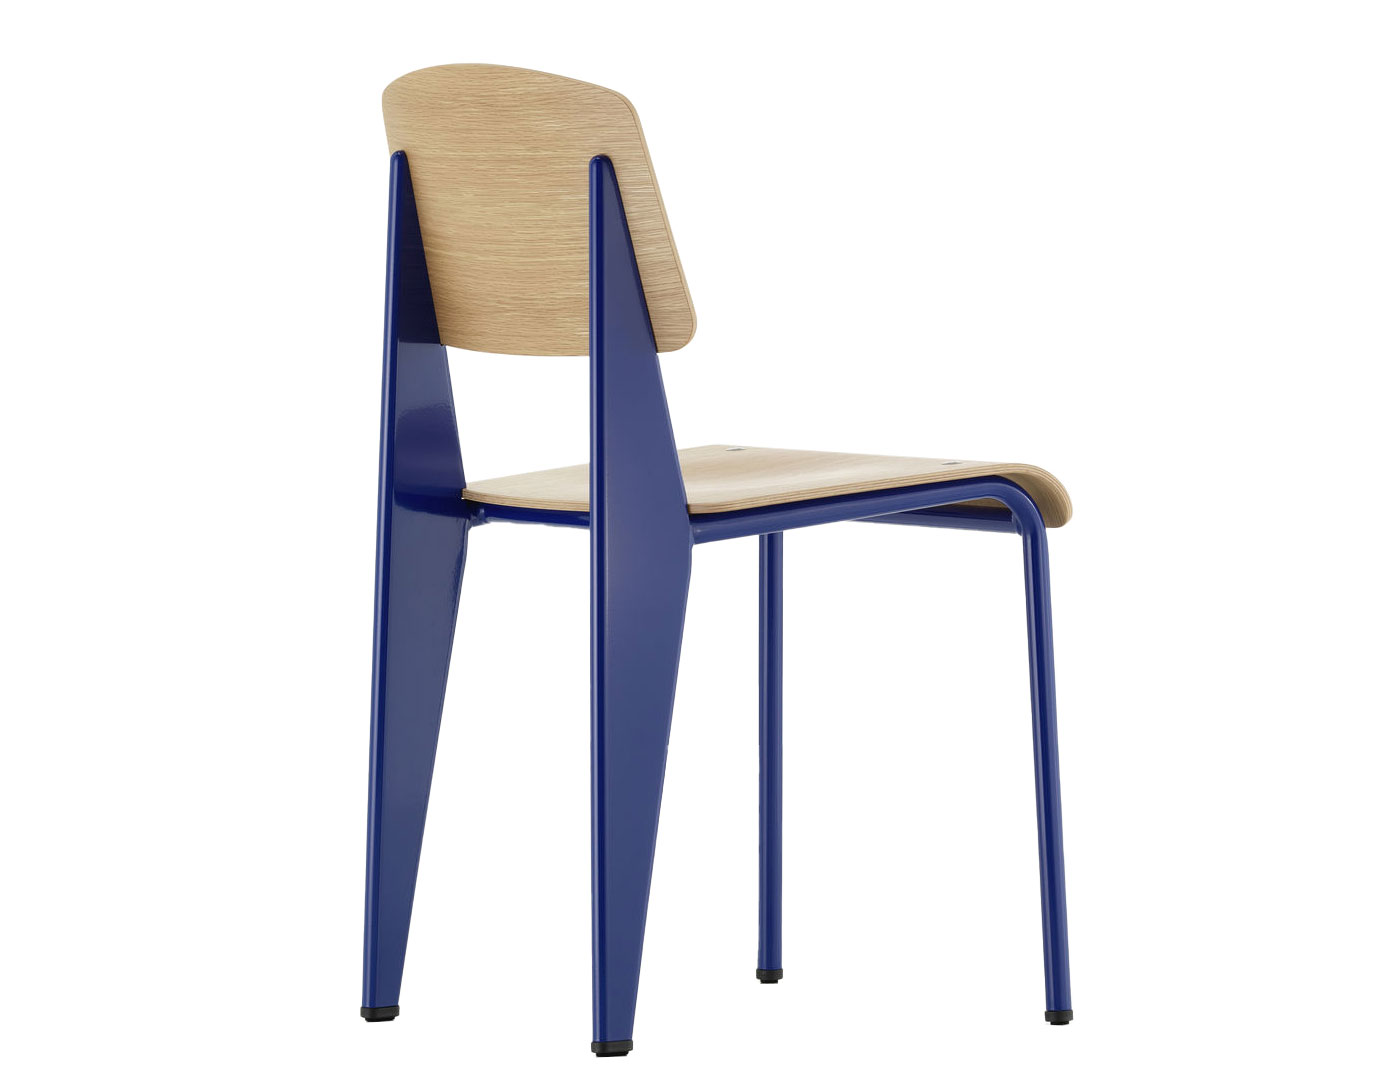 Jean Chair produced by Vitra | hive